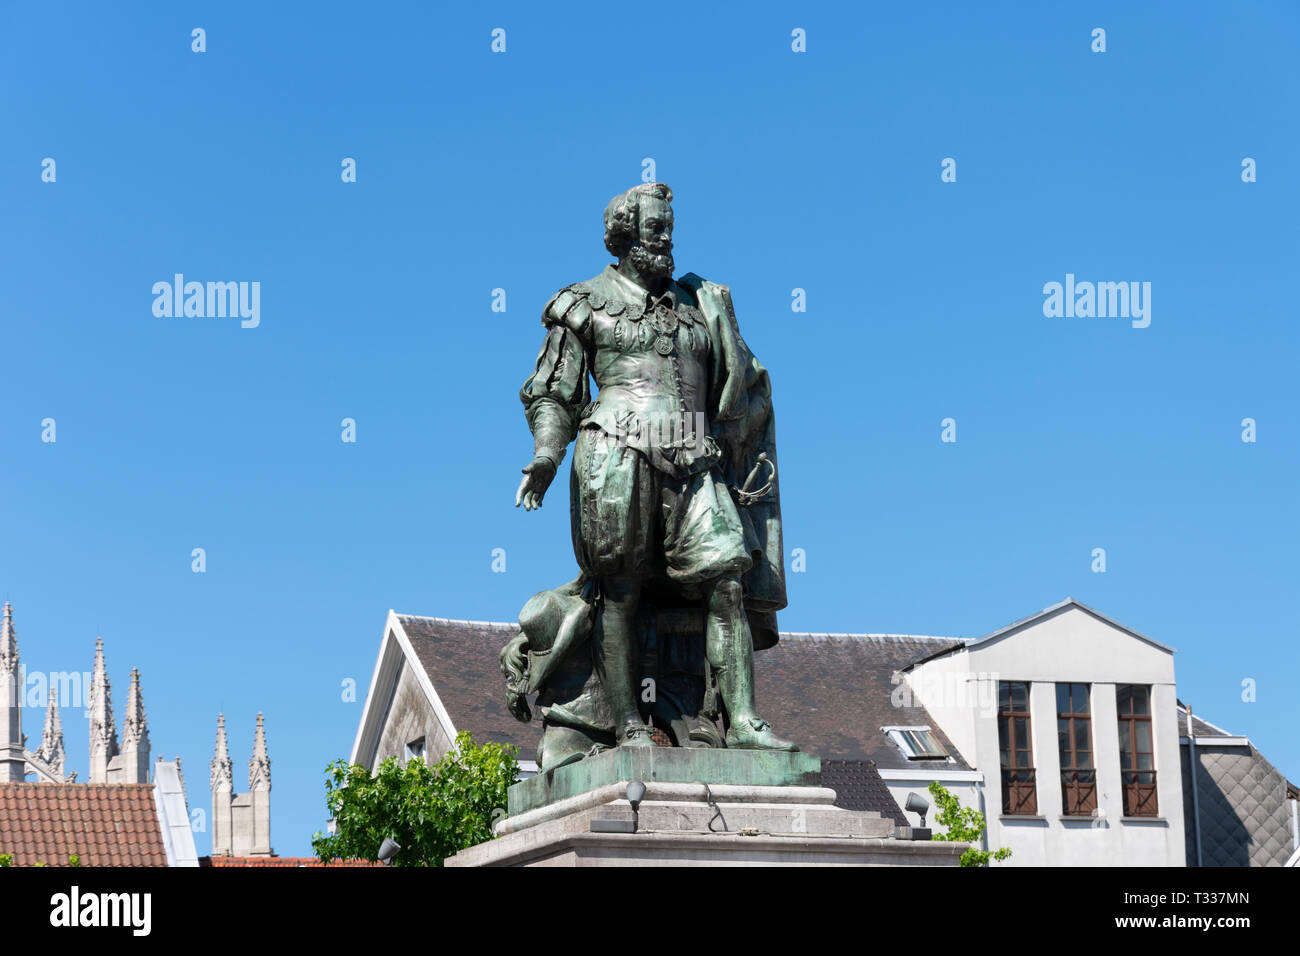 Antwerp, Belgium - July 14, 2018 Statue of painter Peter Paul Rubens in Antwerp with old houses and a blue sky in the background Stock Photo